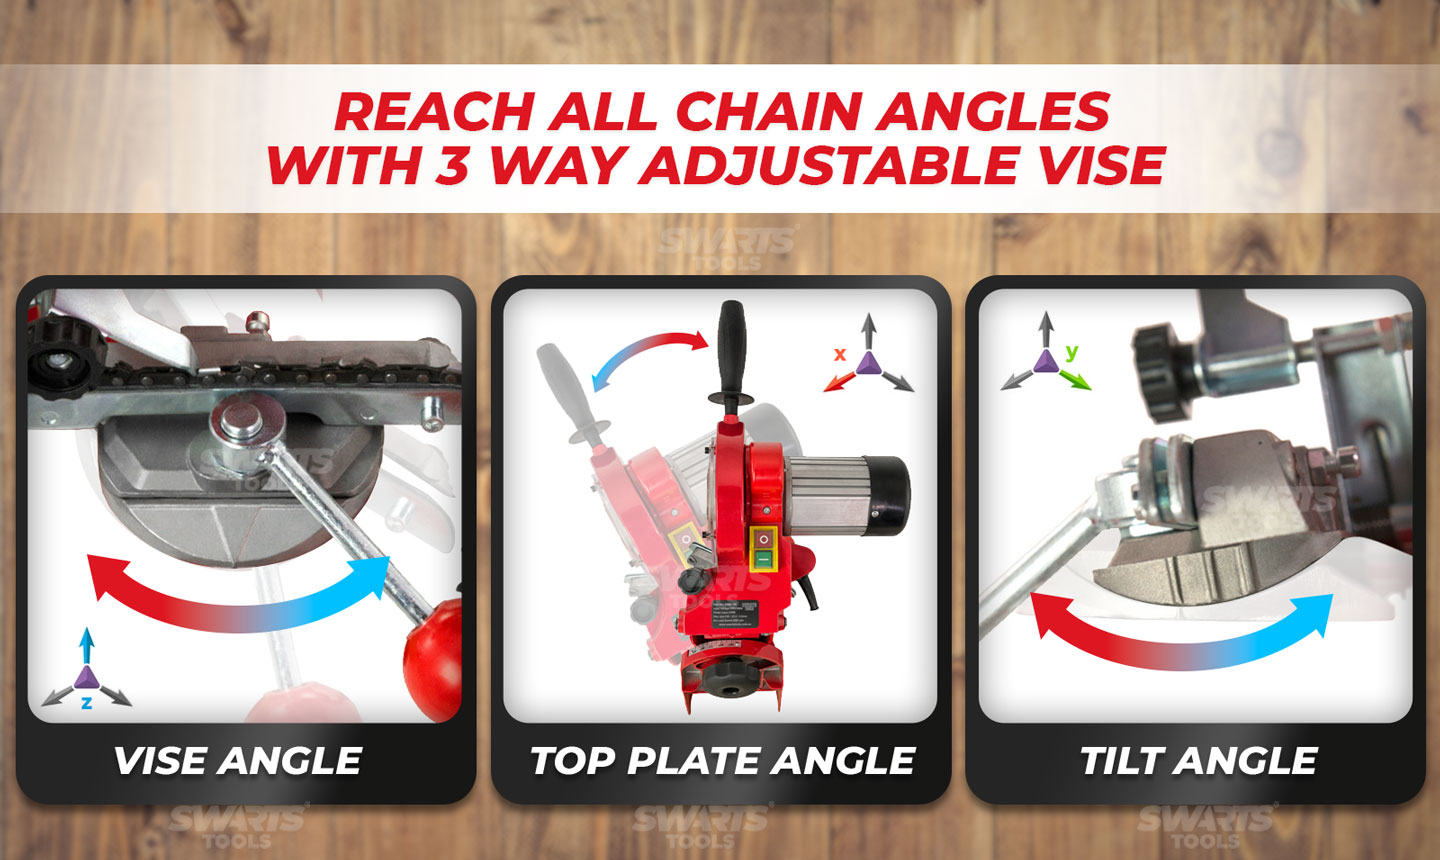 Reach all chain angles with 3 way ADJUSTABLE VISE